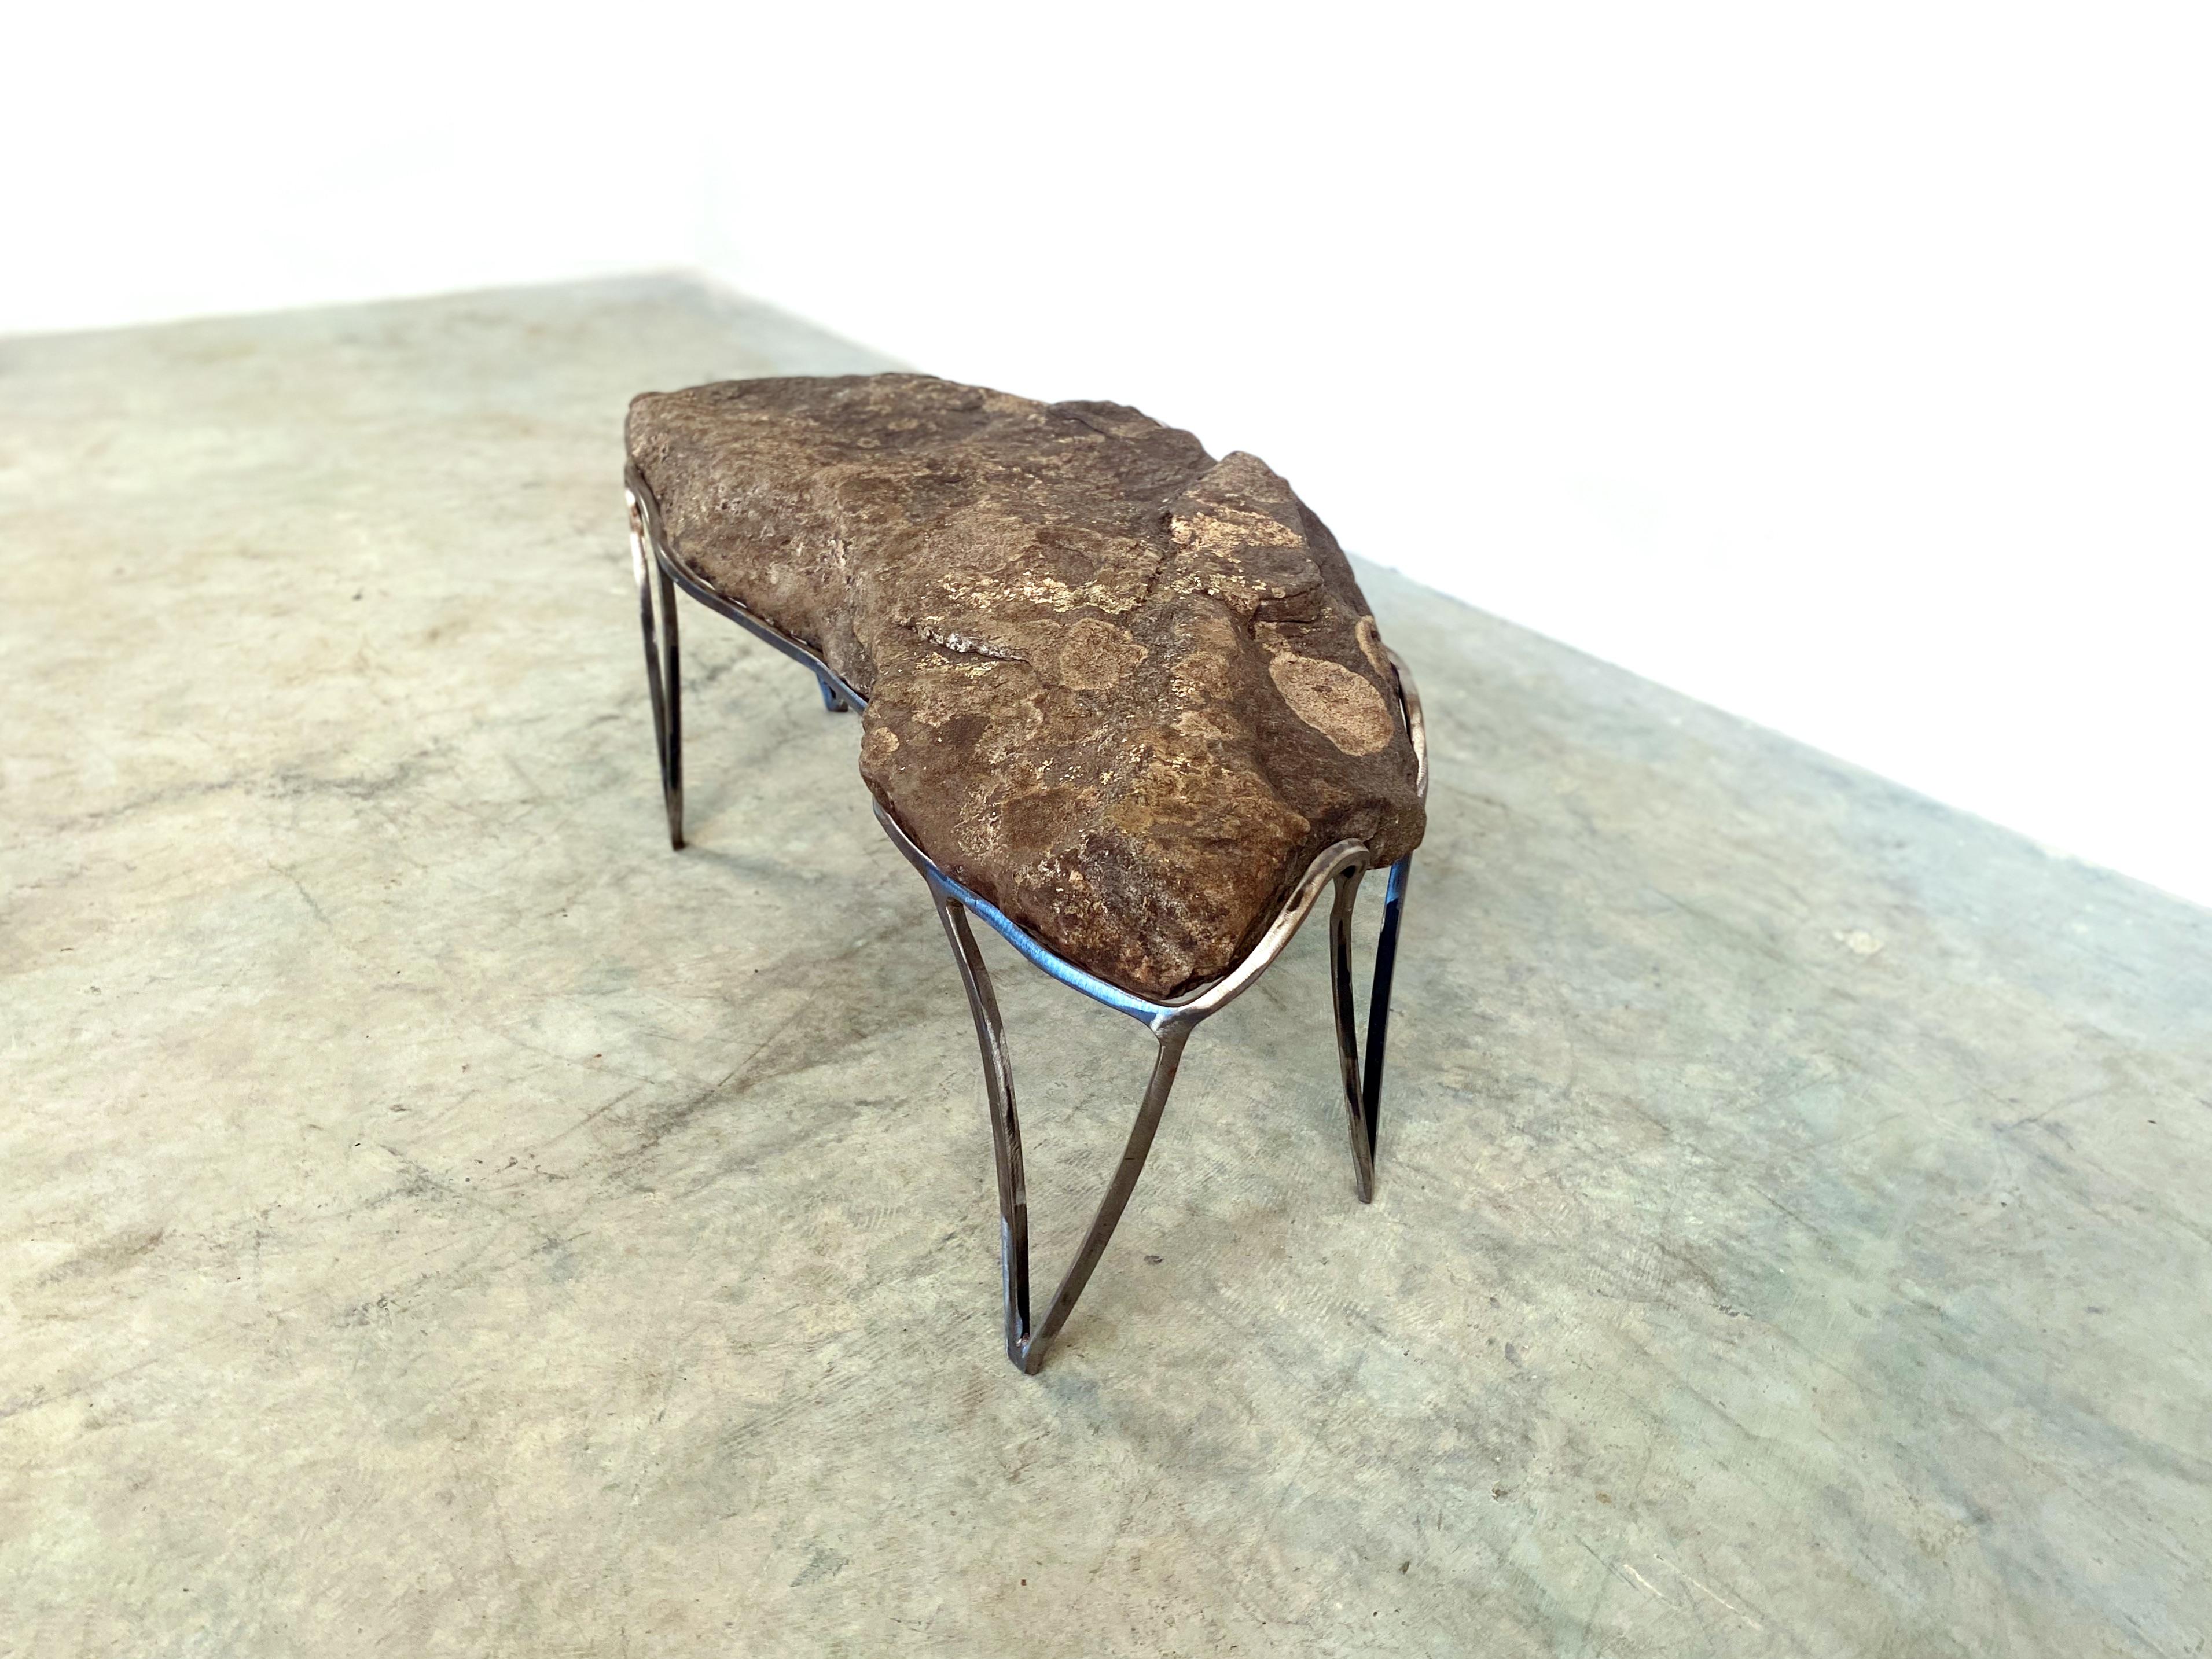 Hand-Crafted Rock Table No.6 by Quinn Morrissette, Natural Stone and Steel Coffee Table 